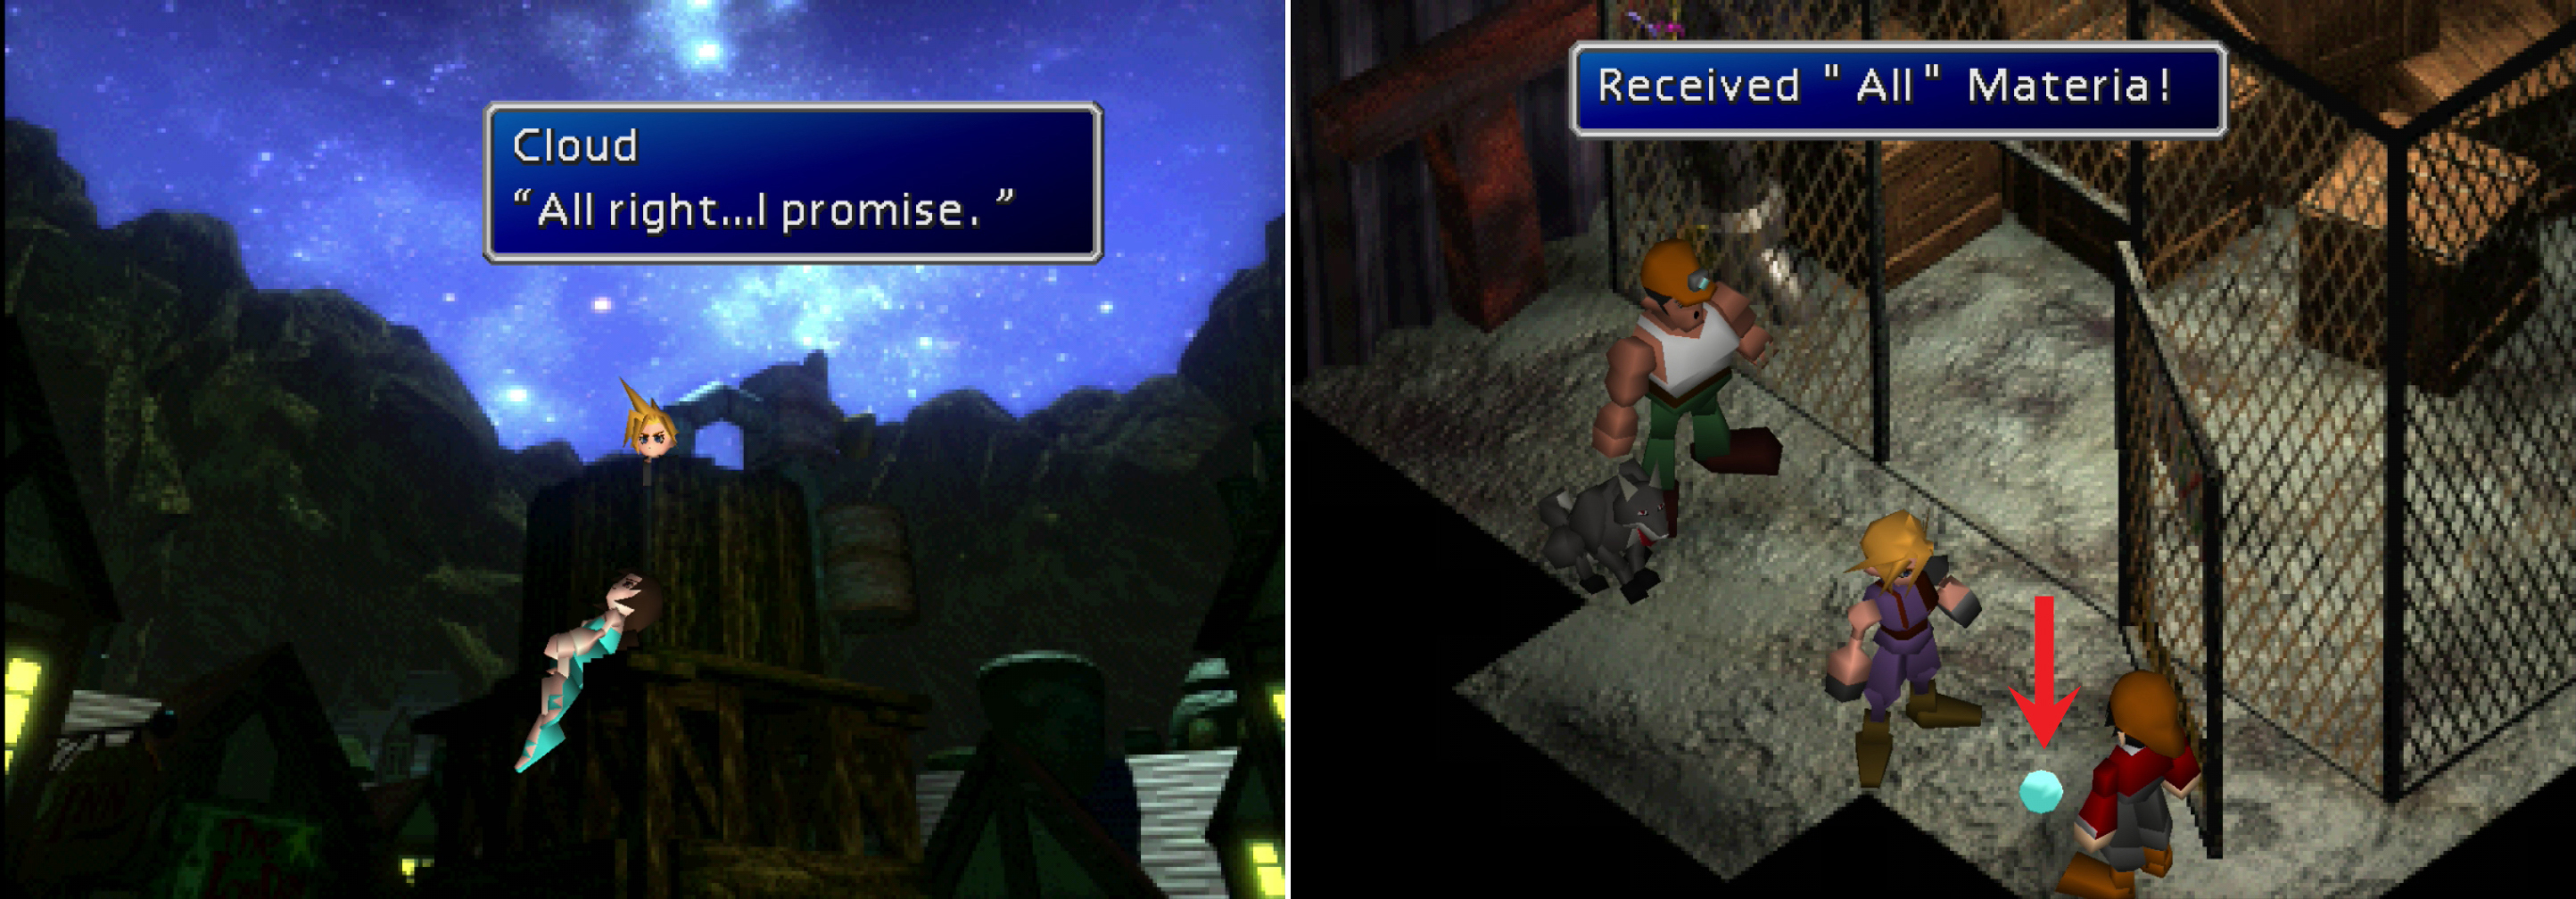 A fateful promise comes back to haunt Cloud (left). Make sure you grab the All Materia in the training area in Sector 7 (right).